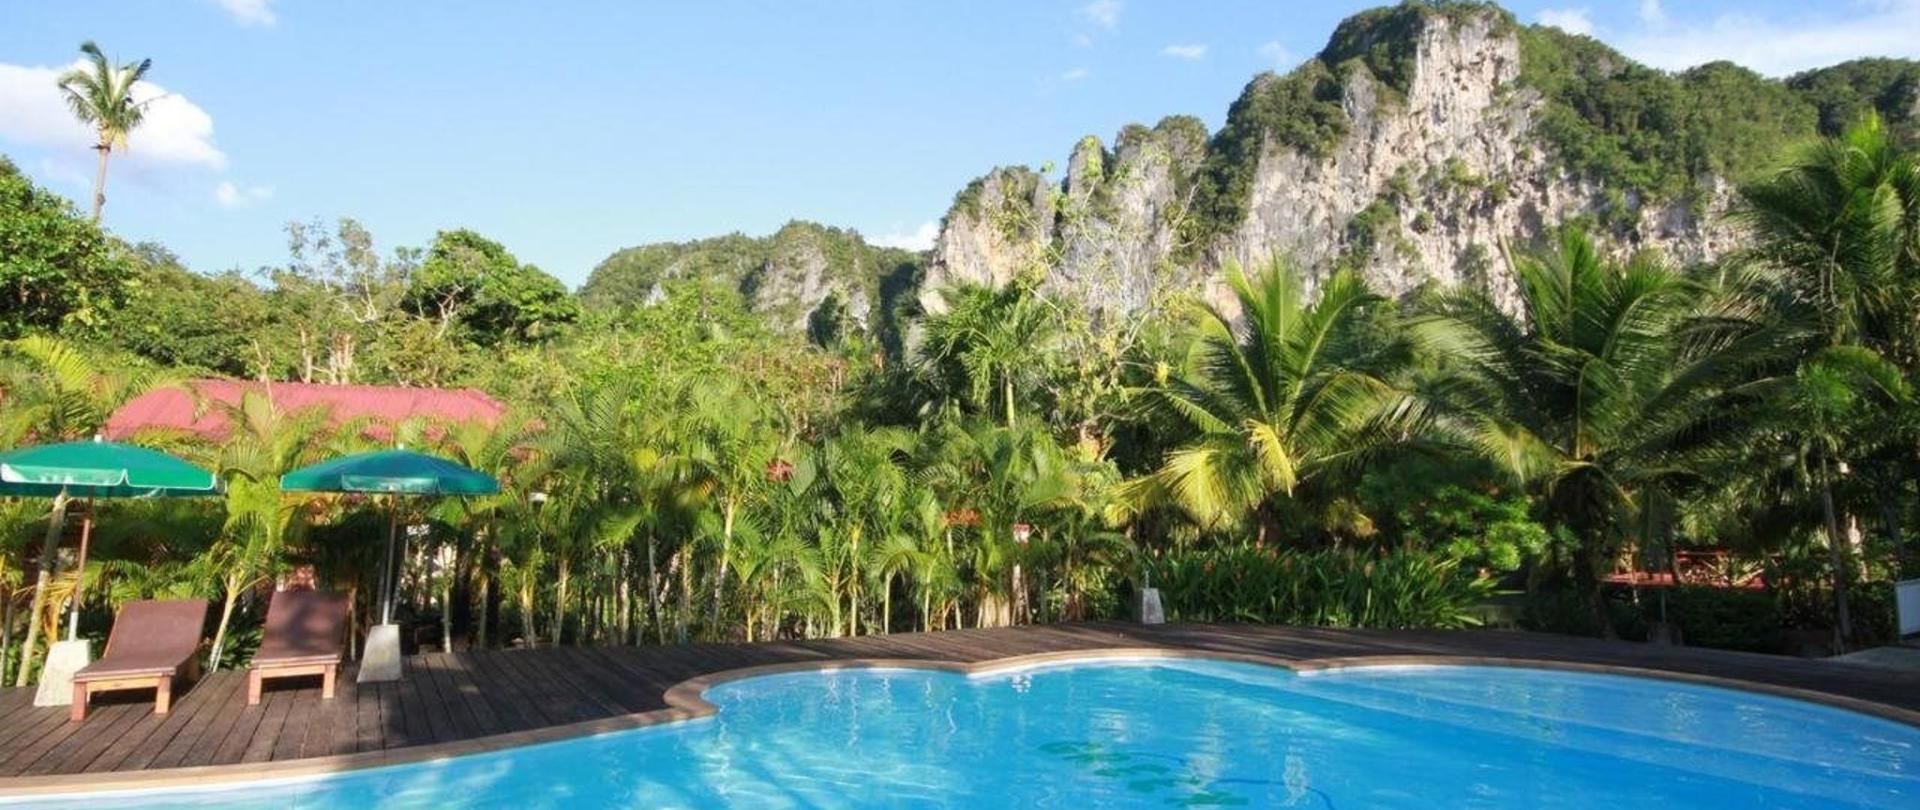 Promo [90% Off] Green Valley Resort Thailand | A Cheap Hotel Room